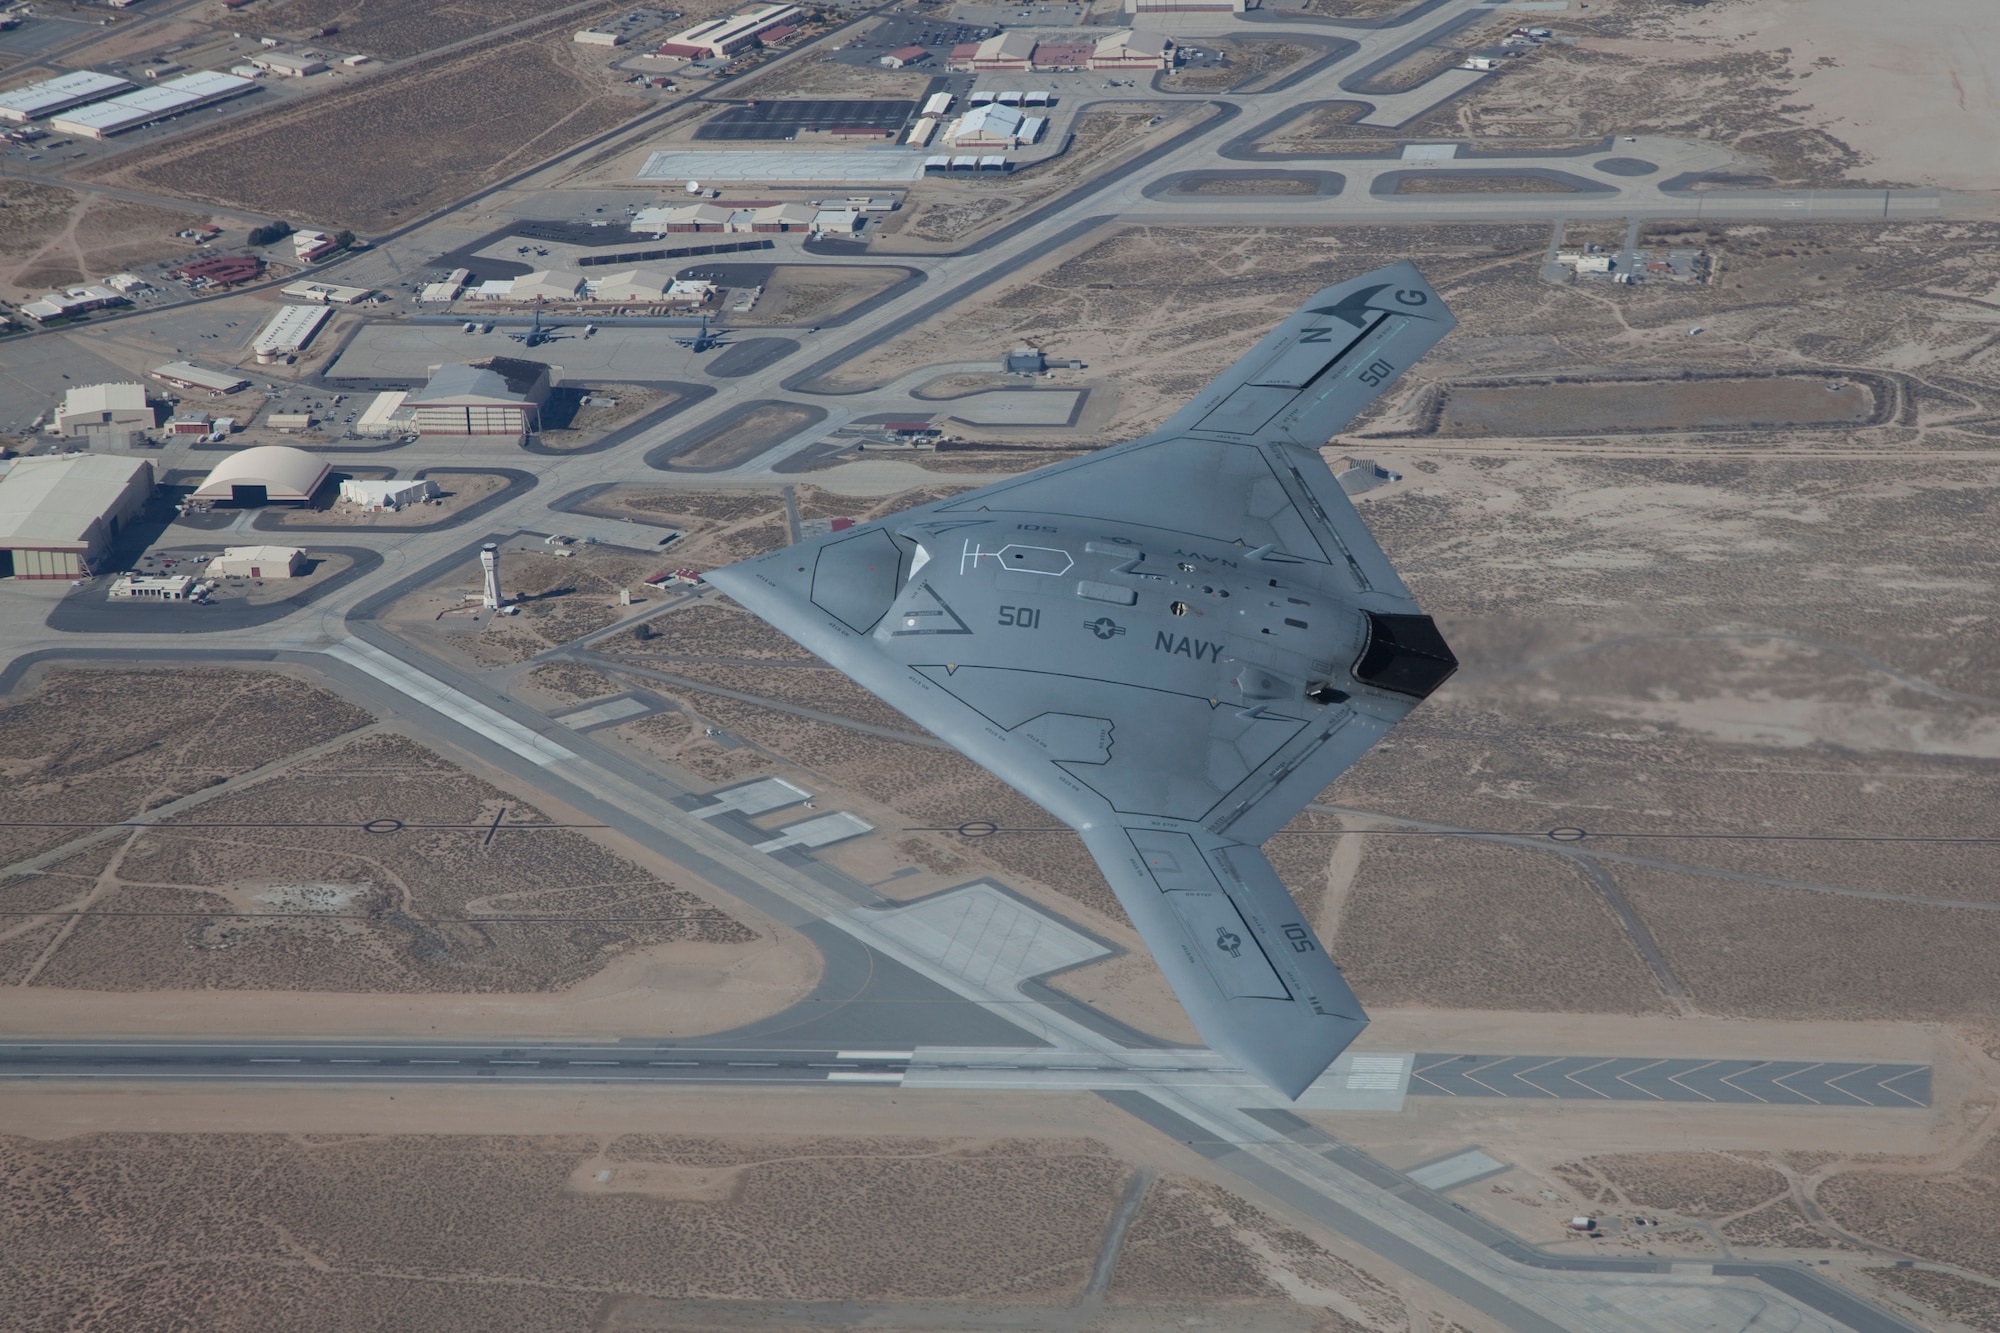 The U.S. Navy's X-47B Unmanned Combat Air System demonstrator flies over Edwards during a routine test mission. The UCAS-D program conducted the airworthiness test phase for the X-47B at Edwards, which came to a successful conclusion May 15 after more than two years of testing. Team Edwards will continue to support the program, as the 412th Maintenance Group will send personnel to Naval Air Station Patuxent River, Md., to continue supporting in the aircraft carrier suitability test phase. (U.S. Air Force Photo by Chris Neill)